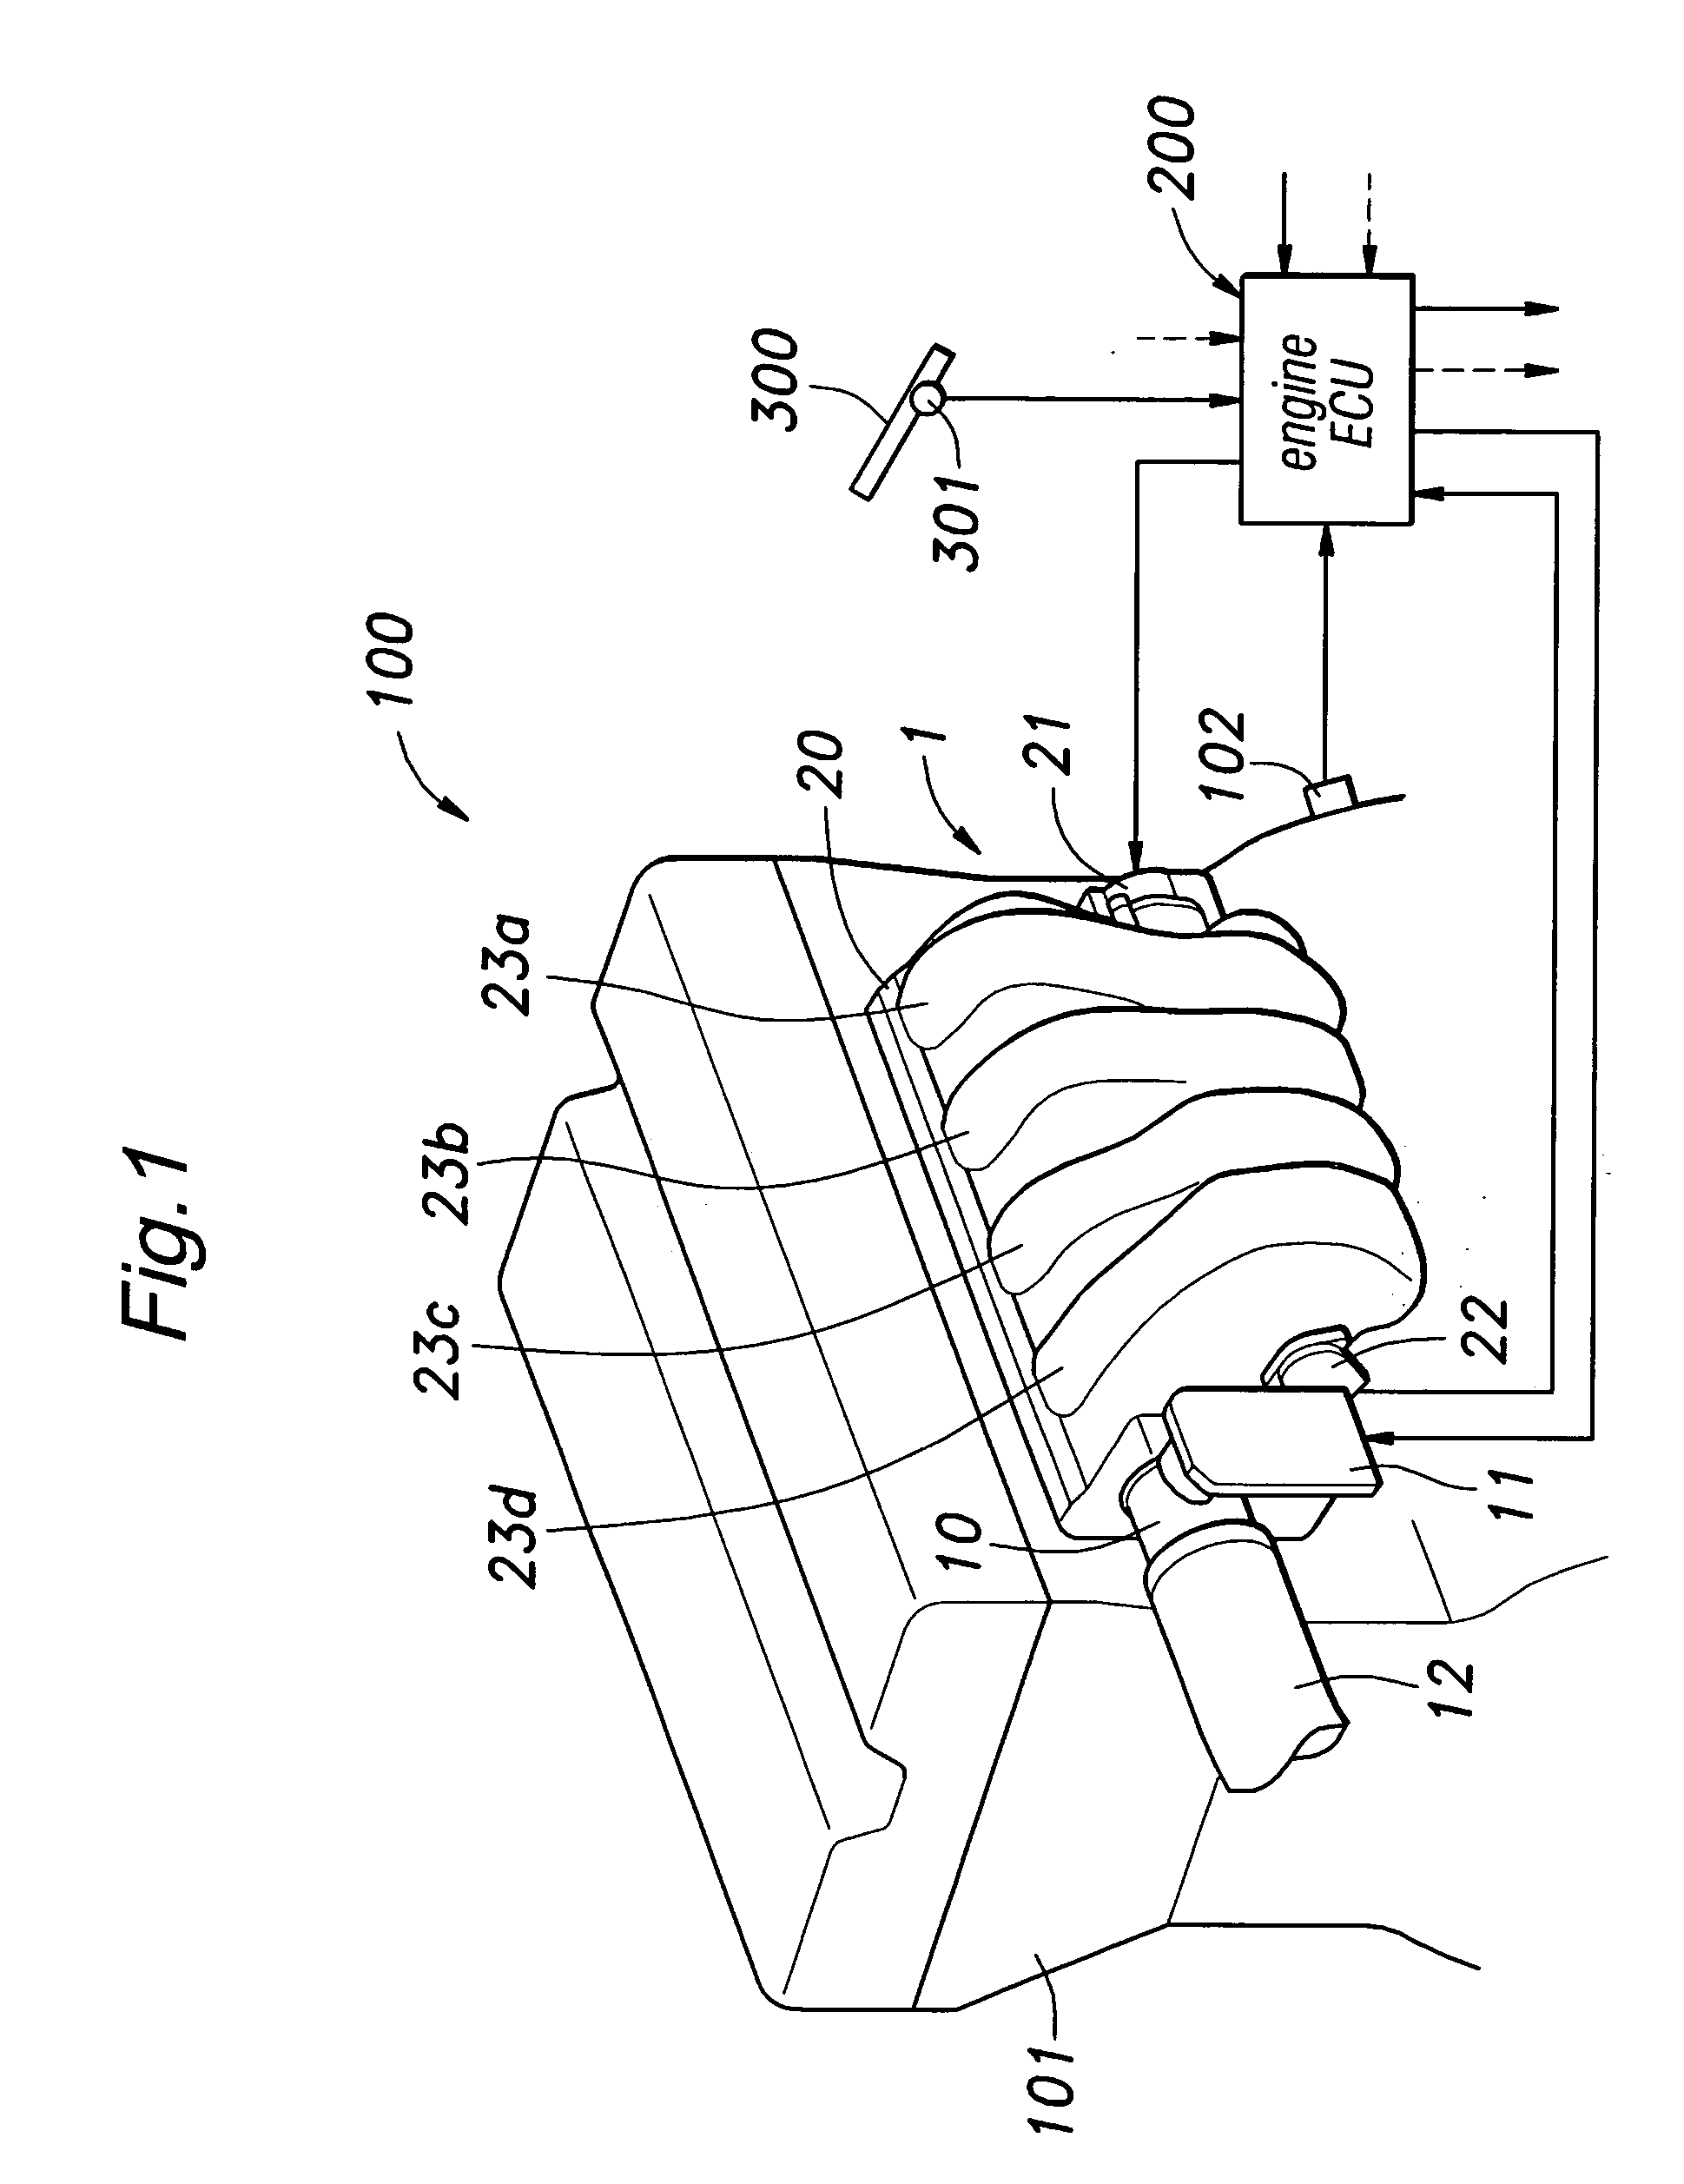 Intake system including a resonance chamber